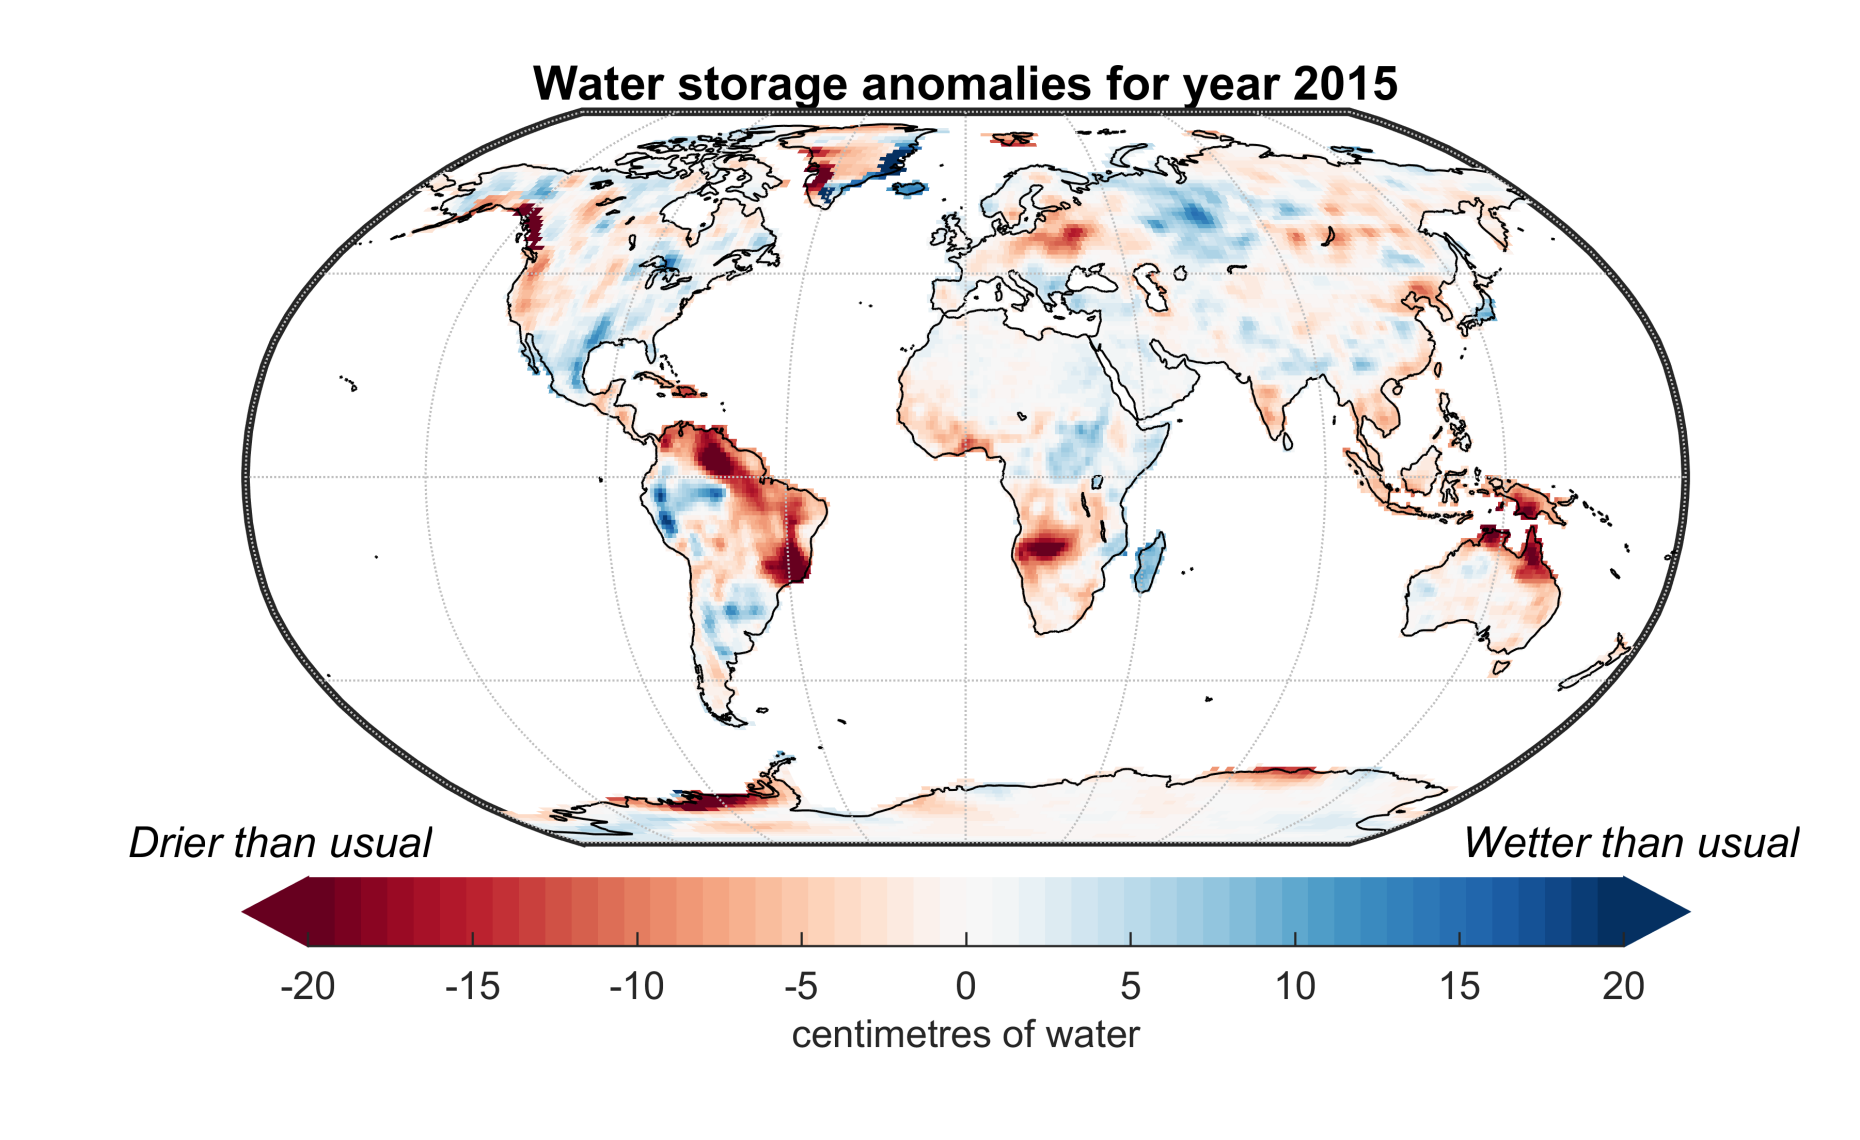 The map shows anomalies in water storage estimated from perturbations of the Earth’s gravity field.